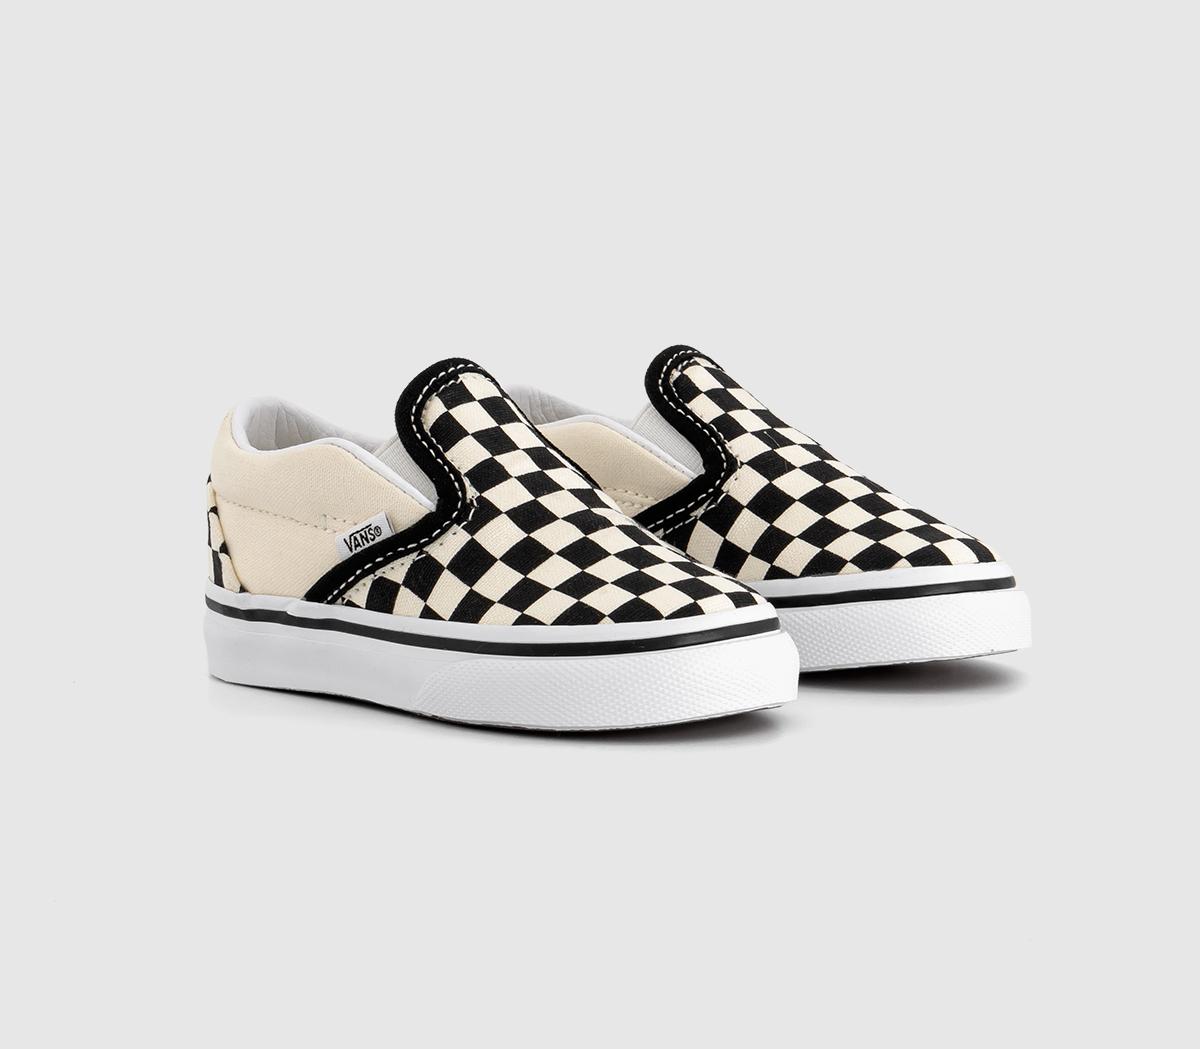 Vans Kids Toddlers Black And White Checkerboard Classic Slip On Trainers, Size: 5 Infant